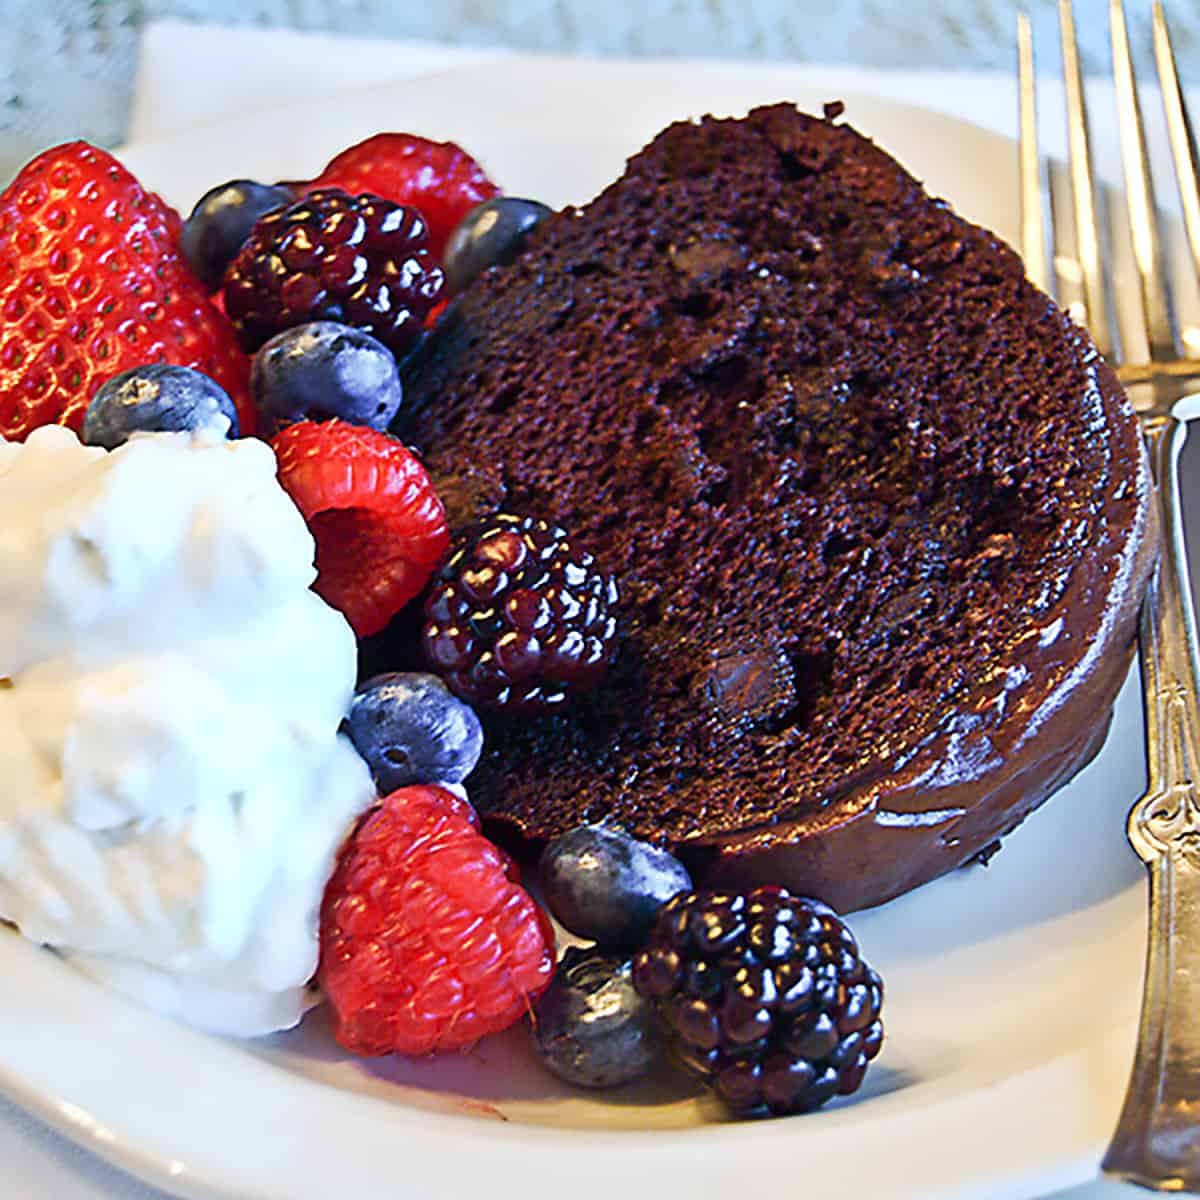 A serving of berry glazed chocolate cake with whipped cream.